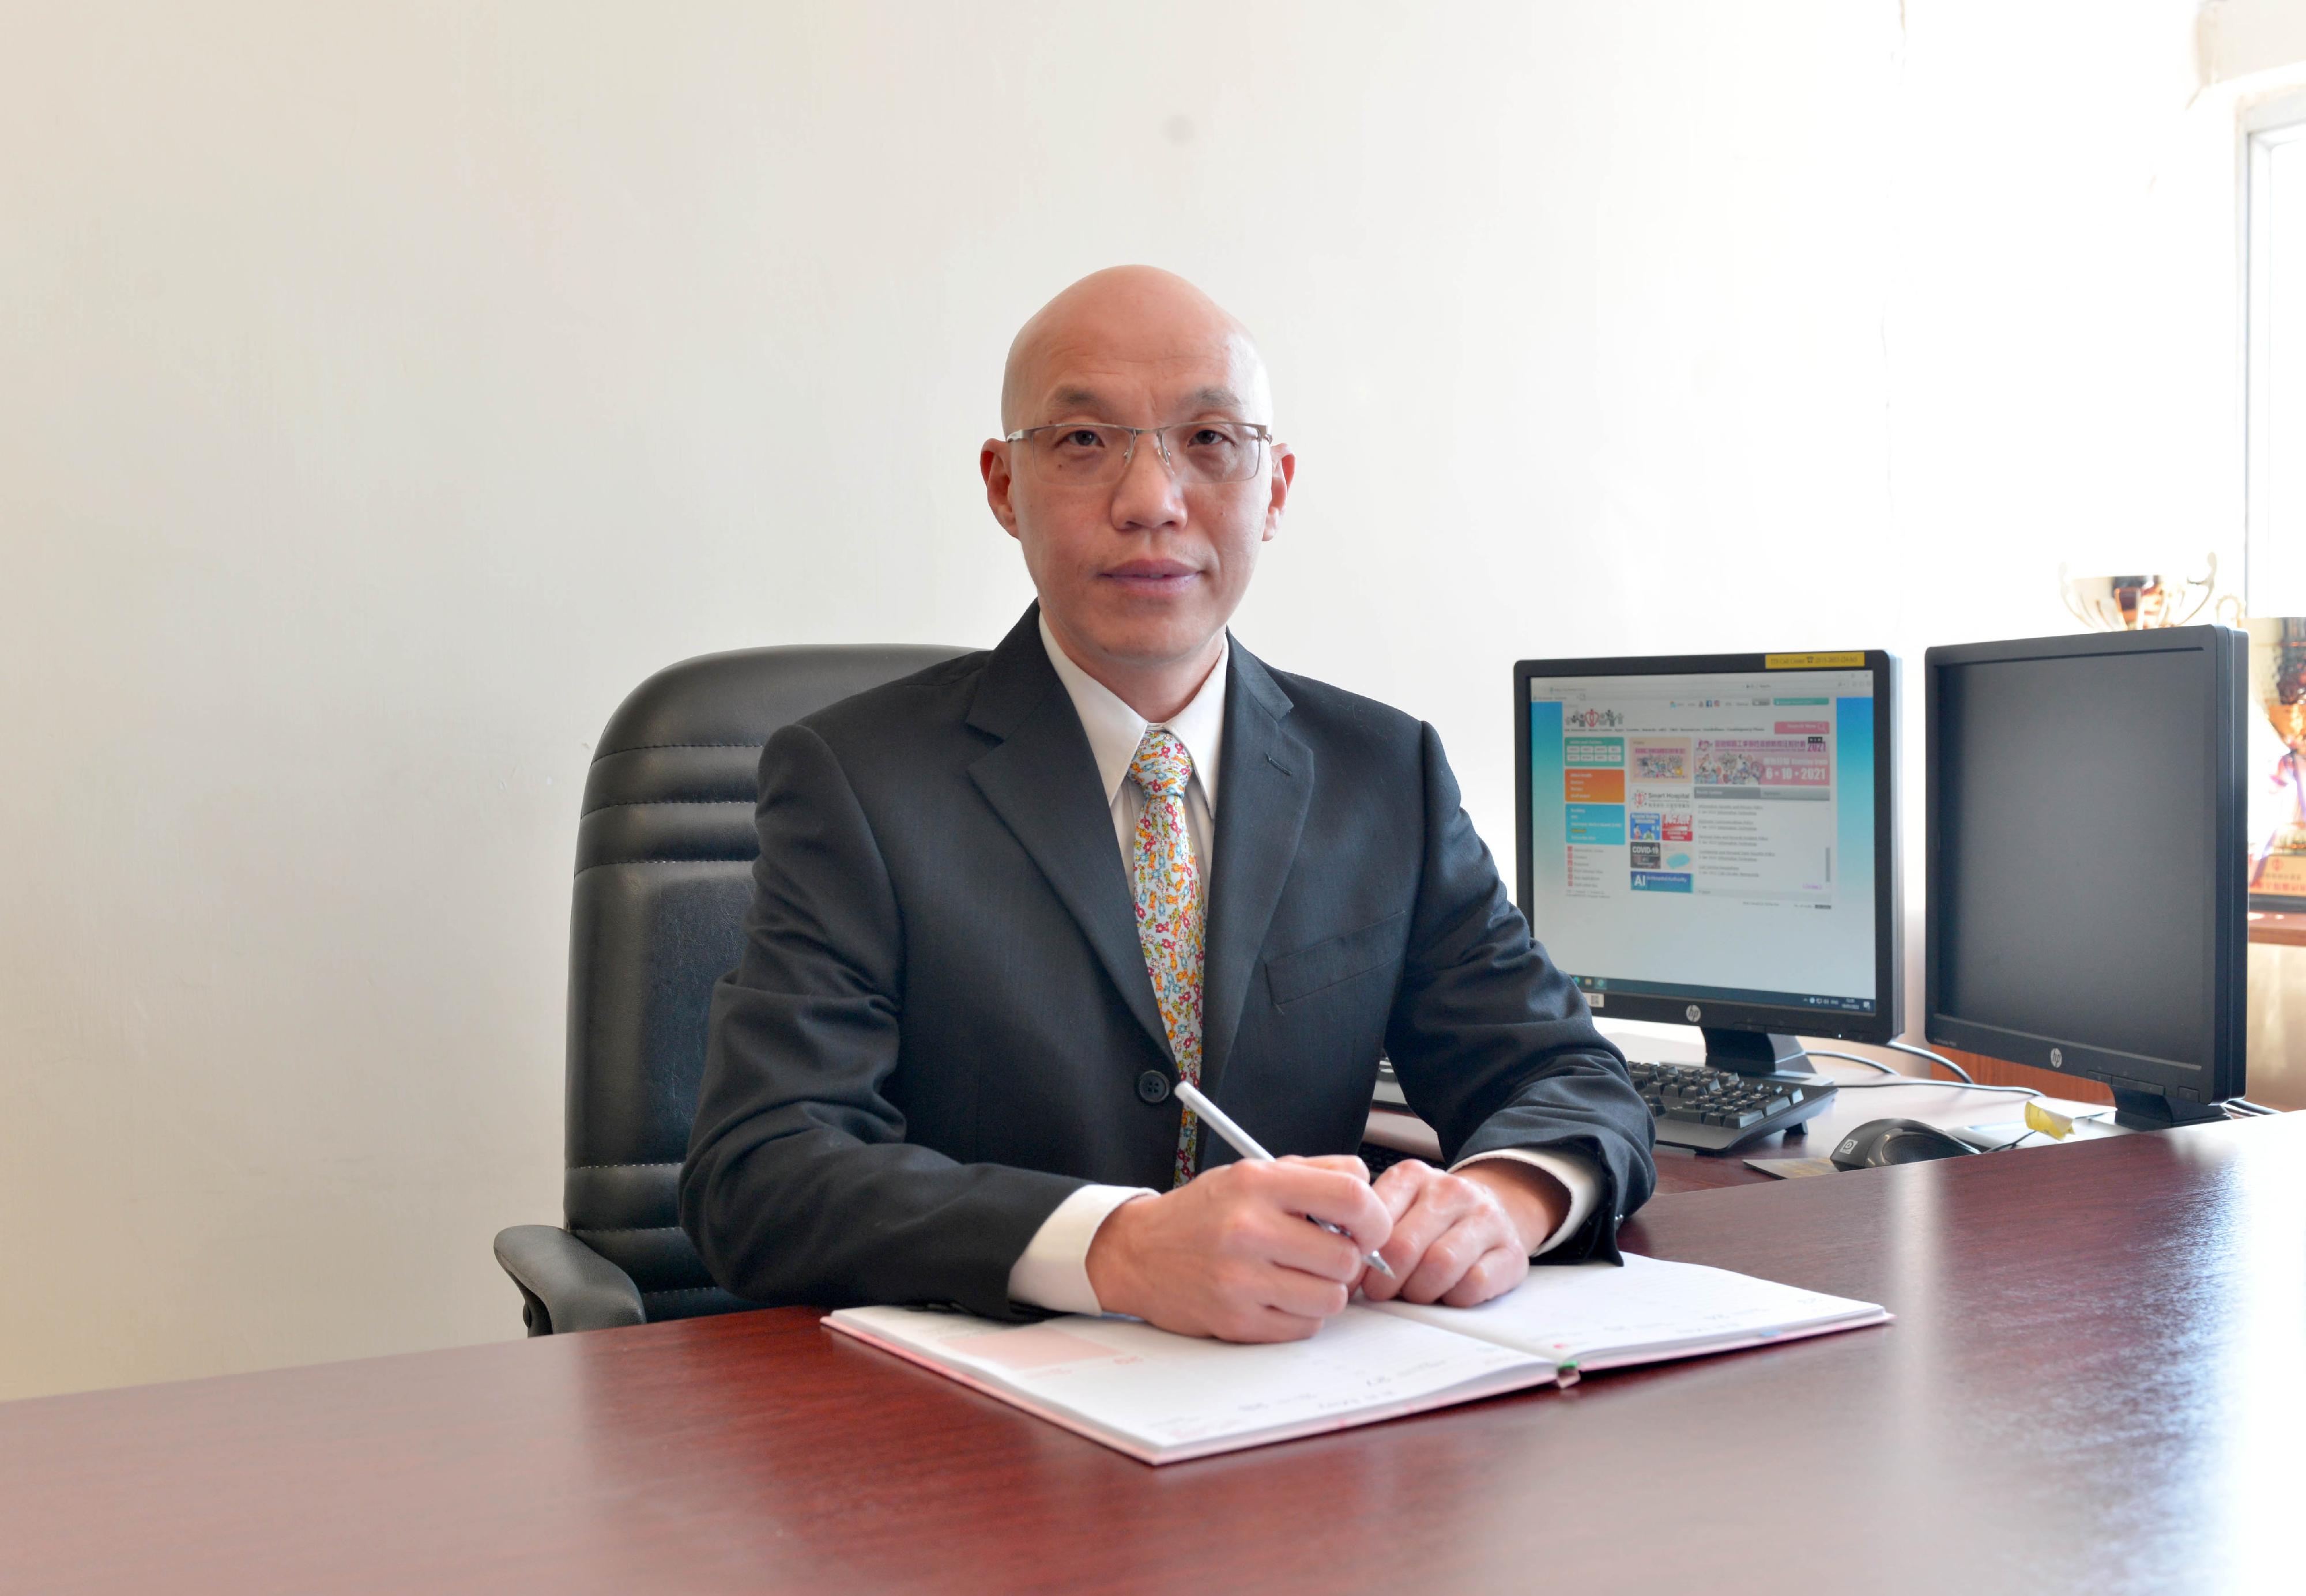 The Hospital Authority announced today (January 20) that Dr Chan Kam-hoi will be appointed as the Hospital Chief Executive of the Duchess of Kent Children's Hospital at Sandy Bay, Tung Wah Group of Hospitals Fung Yiu King Hospital and MacLehose Medical Rehabilitation Centre with effect from February 1, 2022.